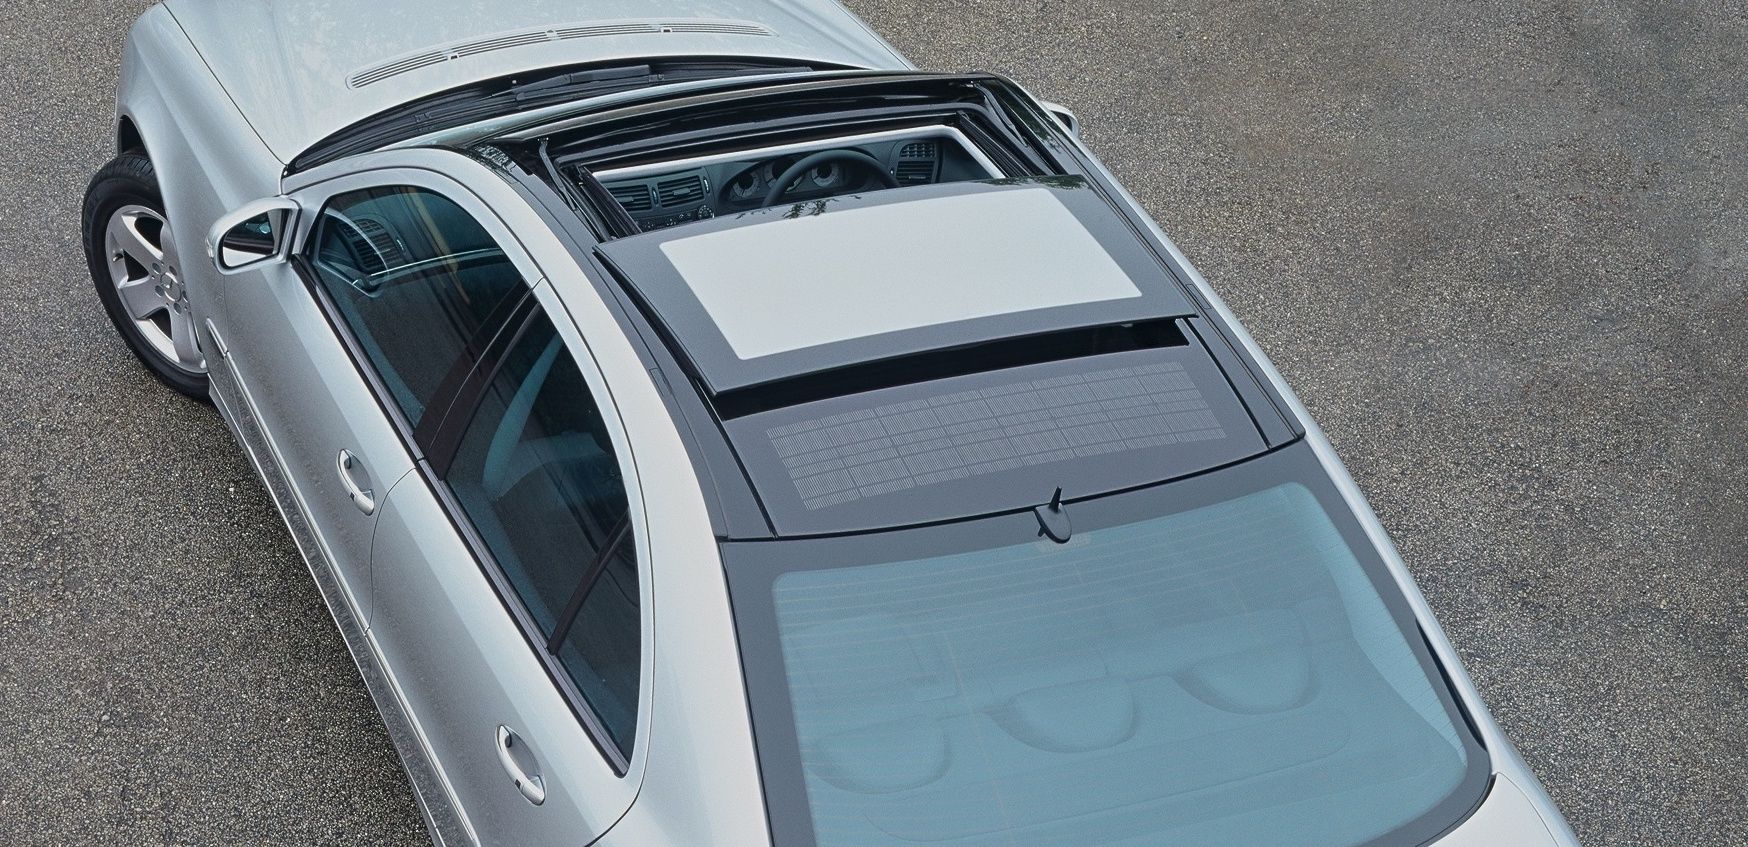 Top view of a sunroof